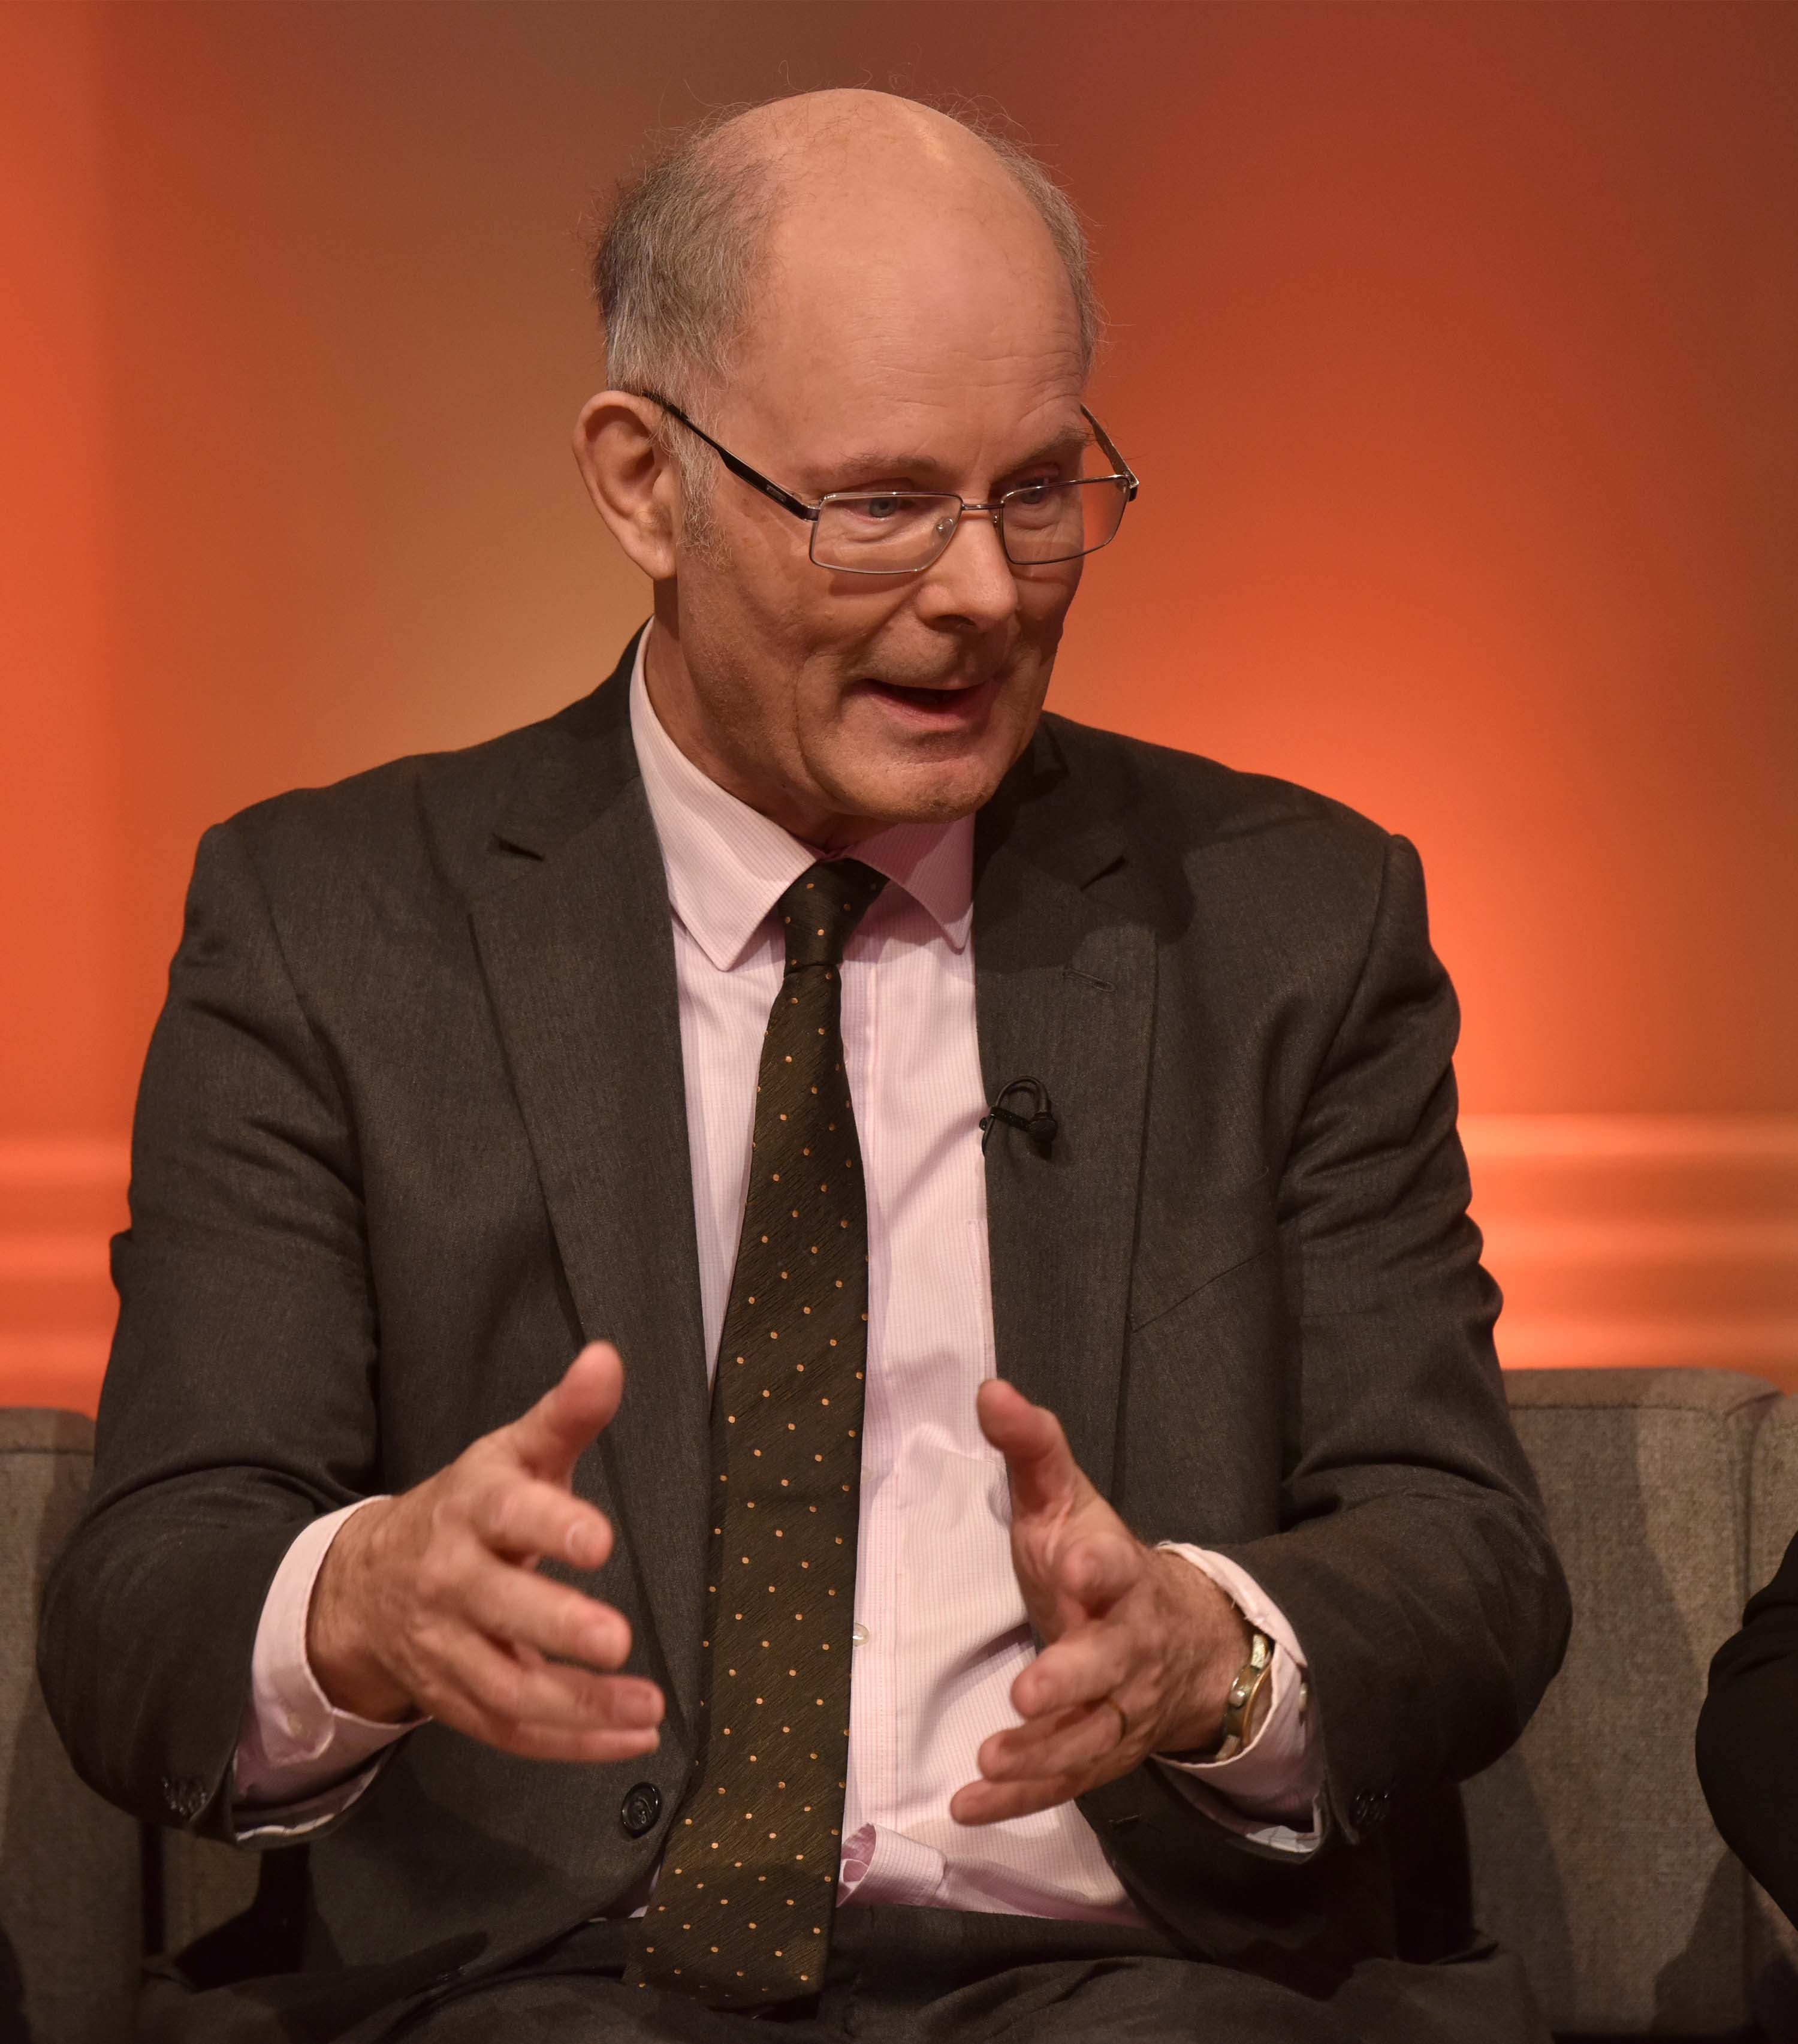 Professor Sir John Curtice will provide election analysis on the BBC (BBC/PA)